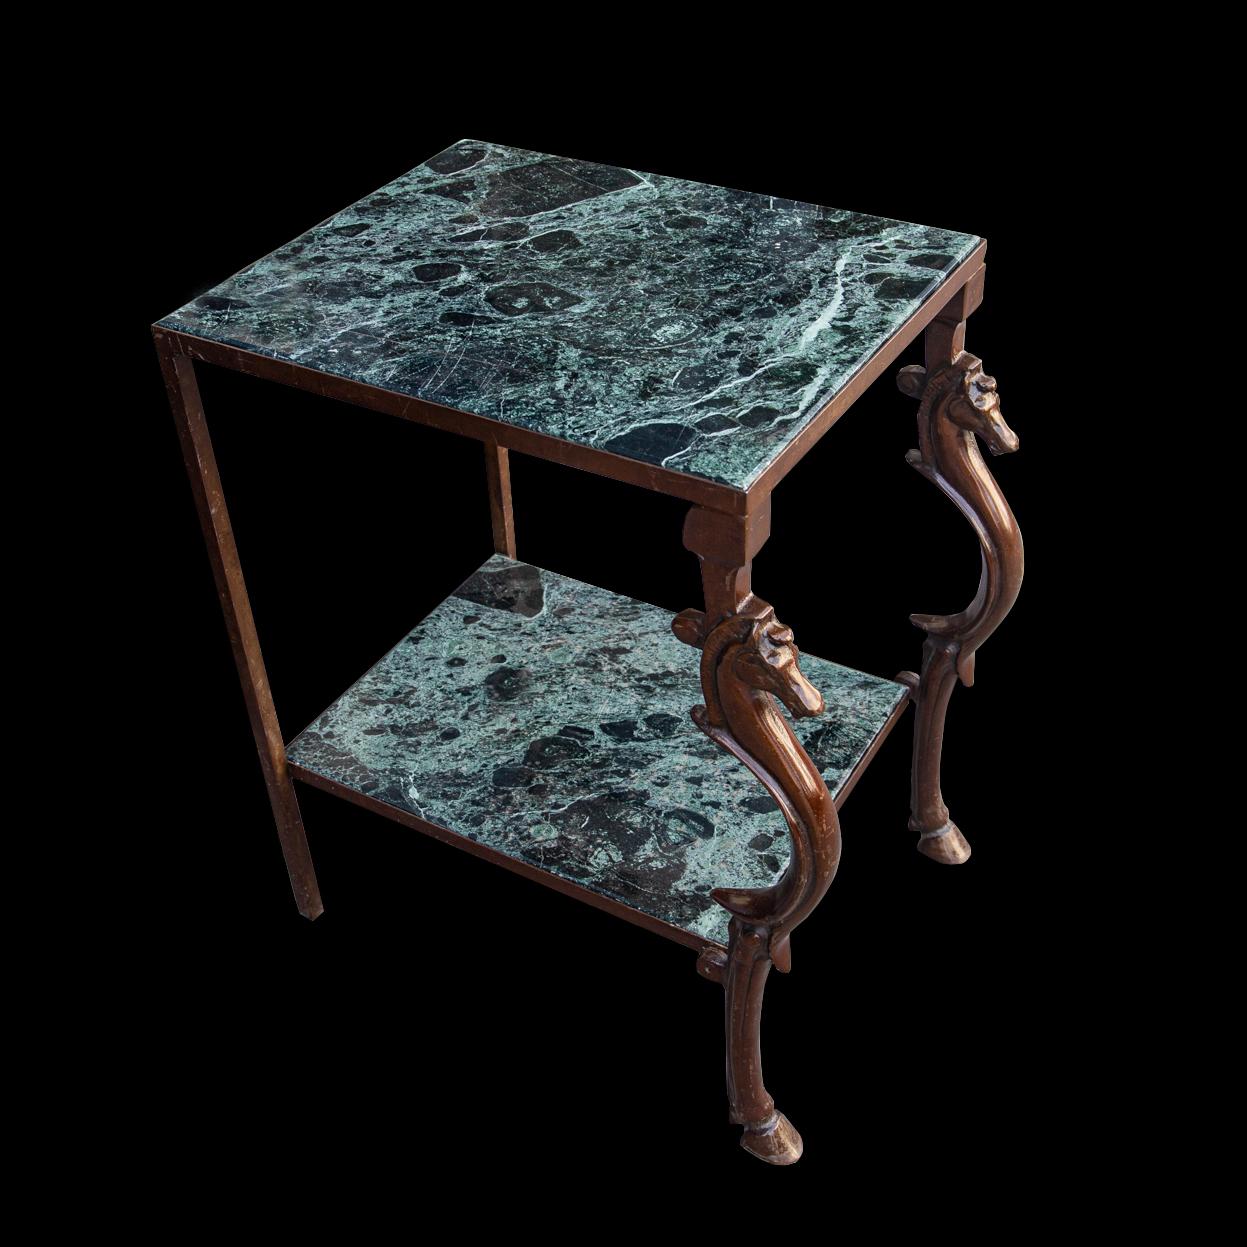 Exceptional quality patinated bronze with sculptural detail - a brace of facing sea horses which terminate gracefully into hooved feet. Featuring two levels in verde marble with wonderful colouration. Sourced from Claridge's the grand landmark hotel